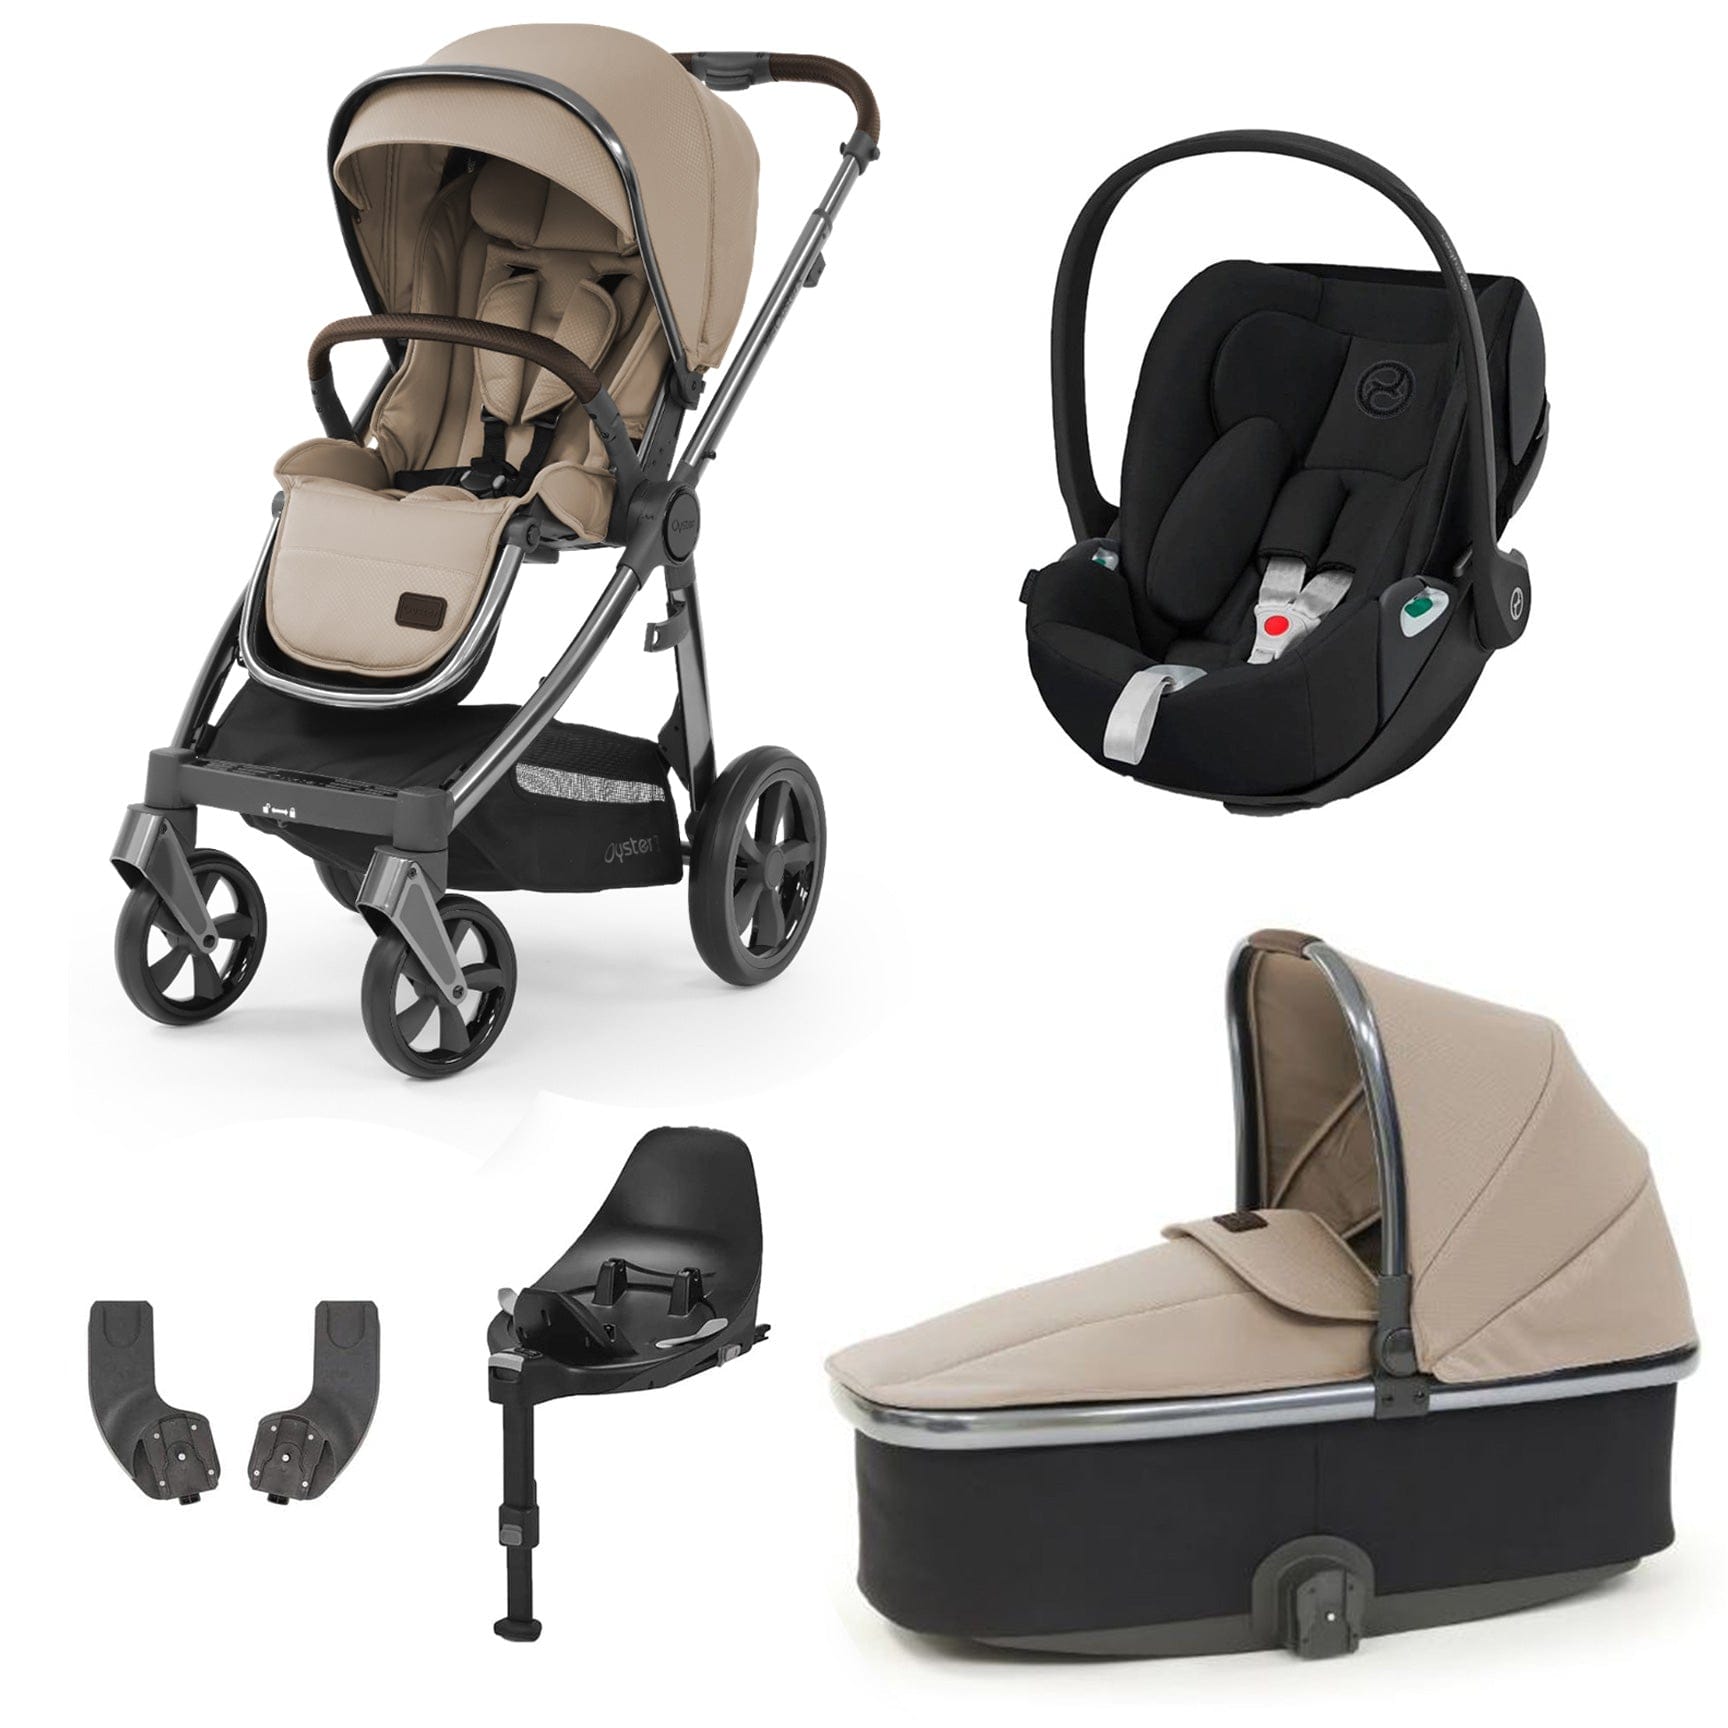 Babystyle Oyster 3 Essential Bundle with Car Seat in Butterscotch Travel Systems 9111-BTS-3 5060711564630